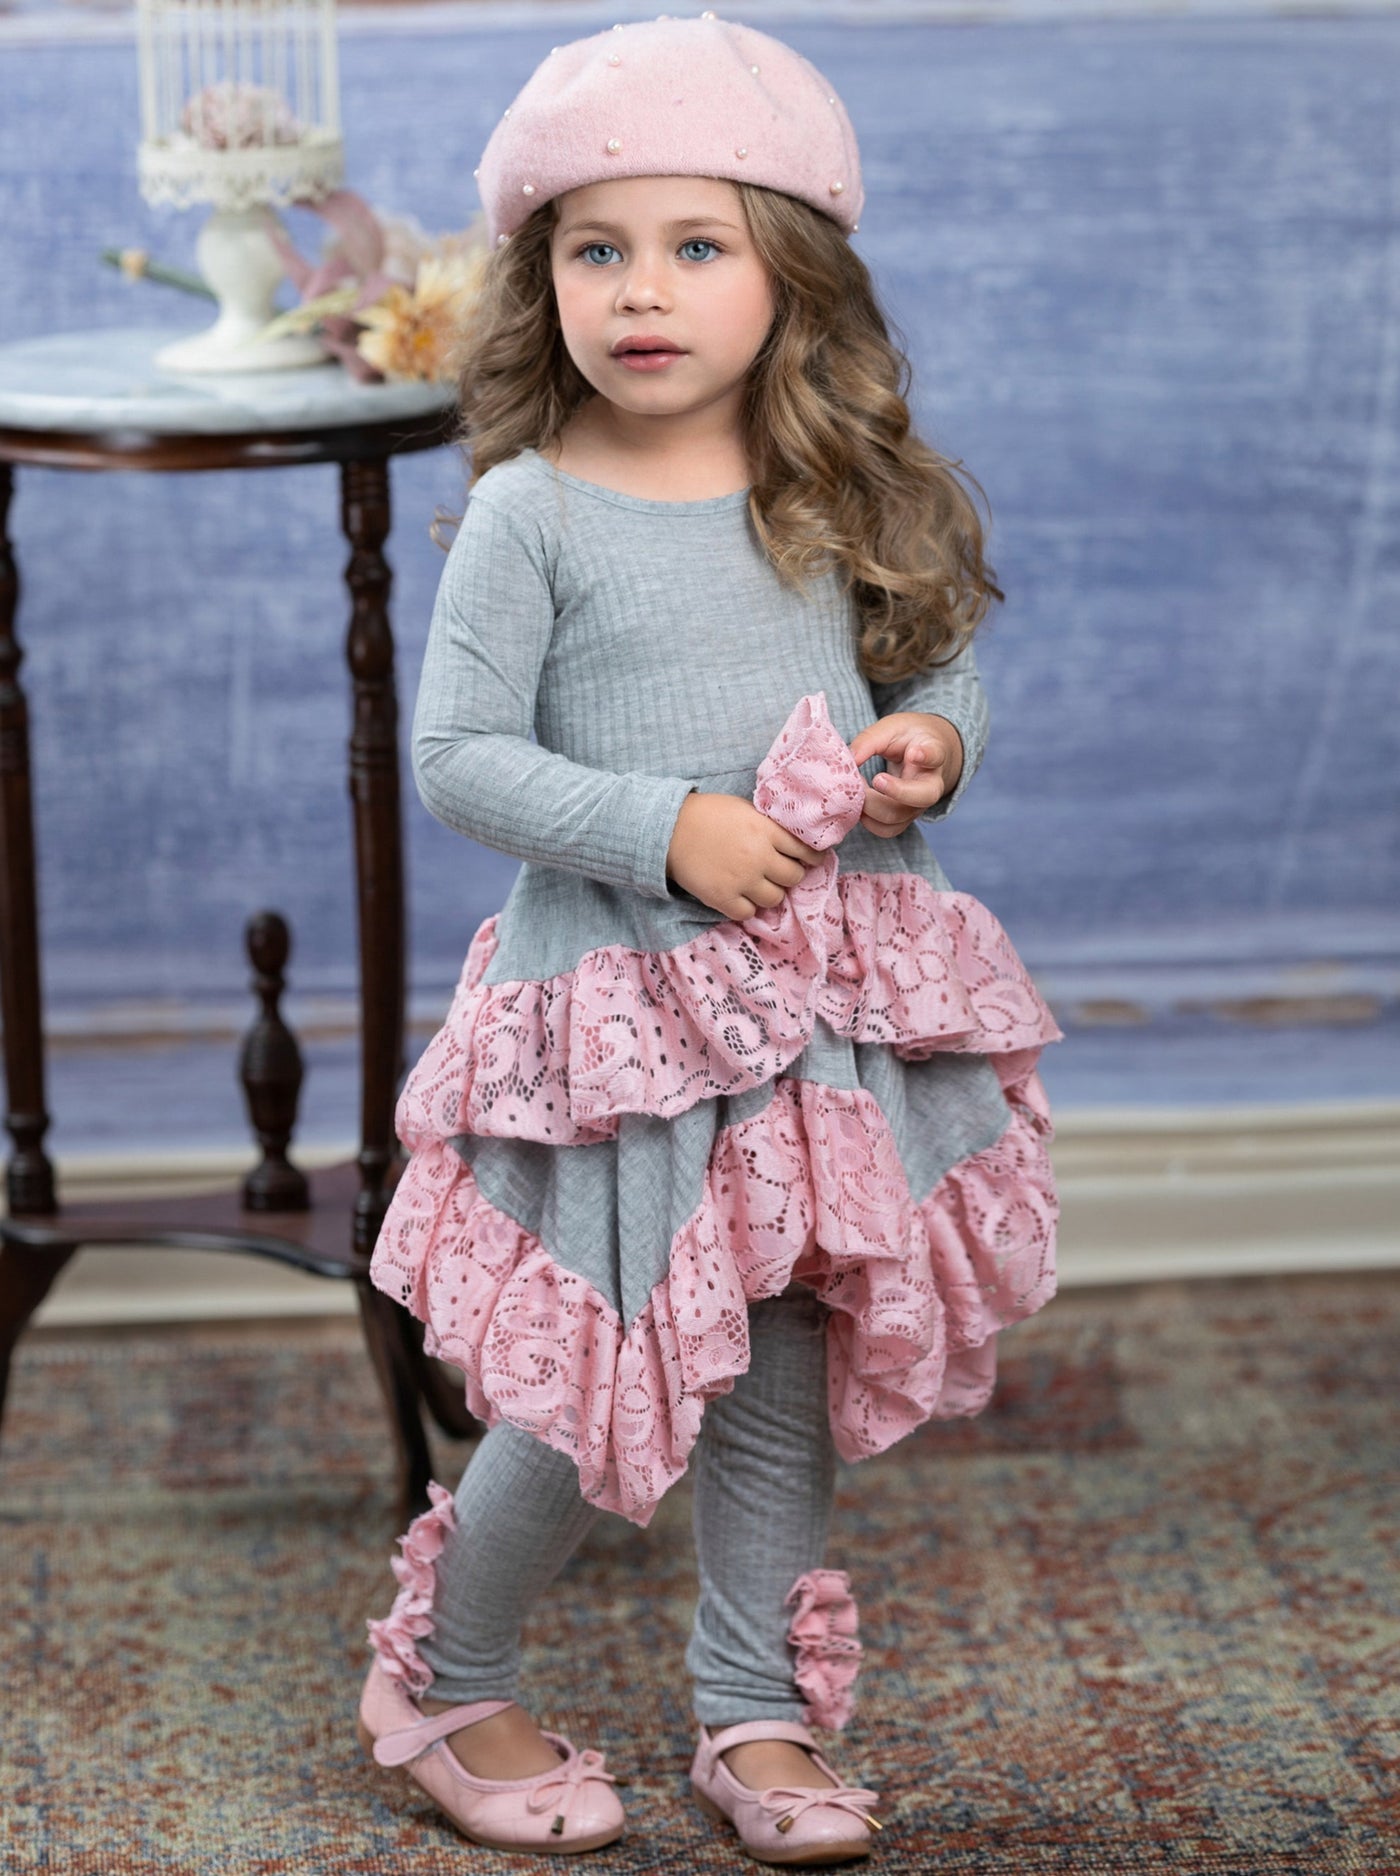 Girls Fall Outfits | Lace Tiered Tunic & Legging Set - Mia Belle Girls